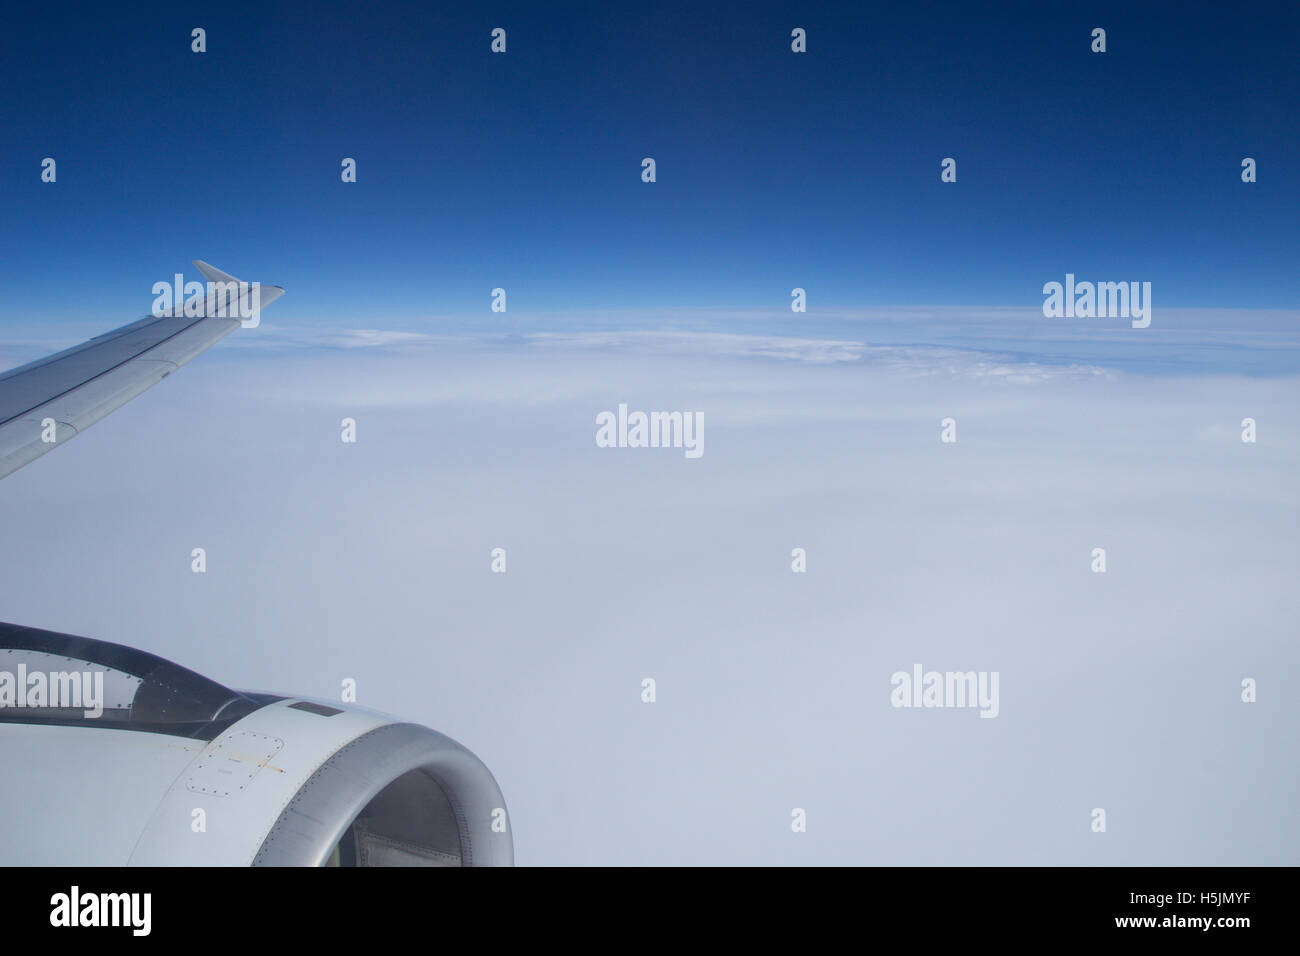 AUSTRIA - October 2016: Clouds and sky as seen through window of an aircraft Stock Photo